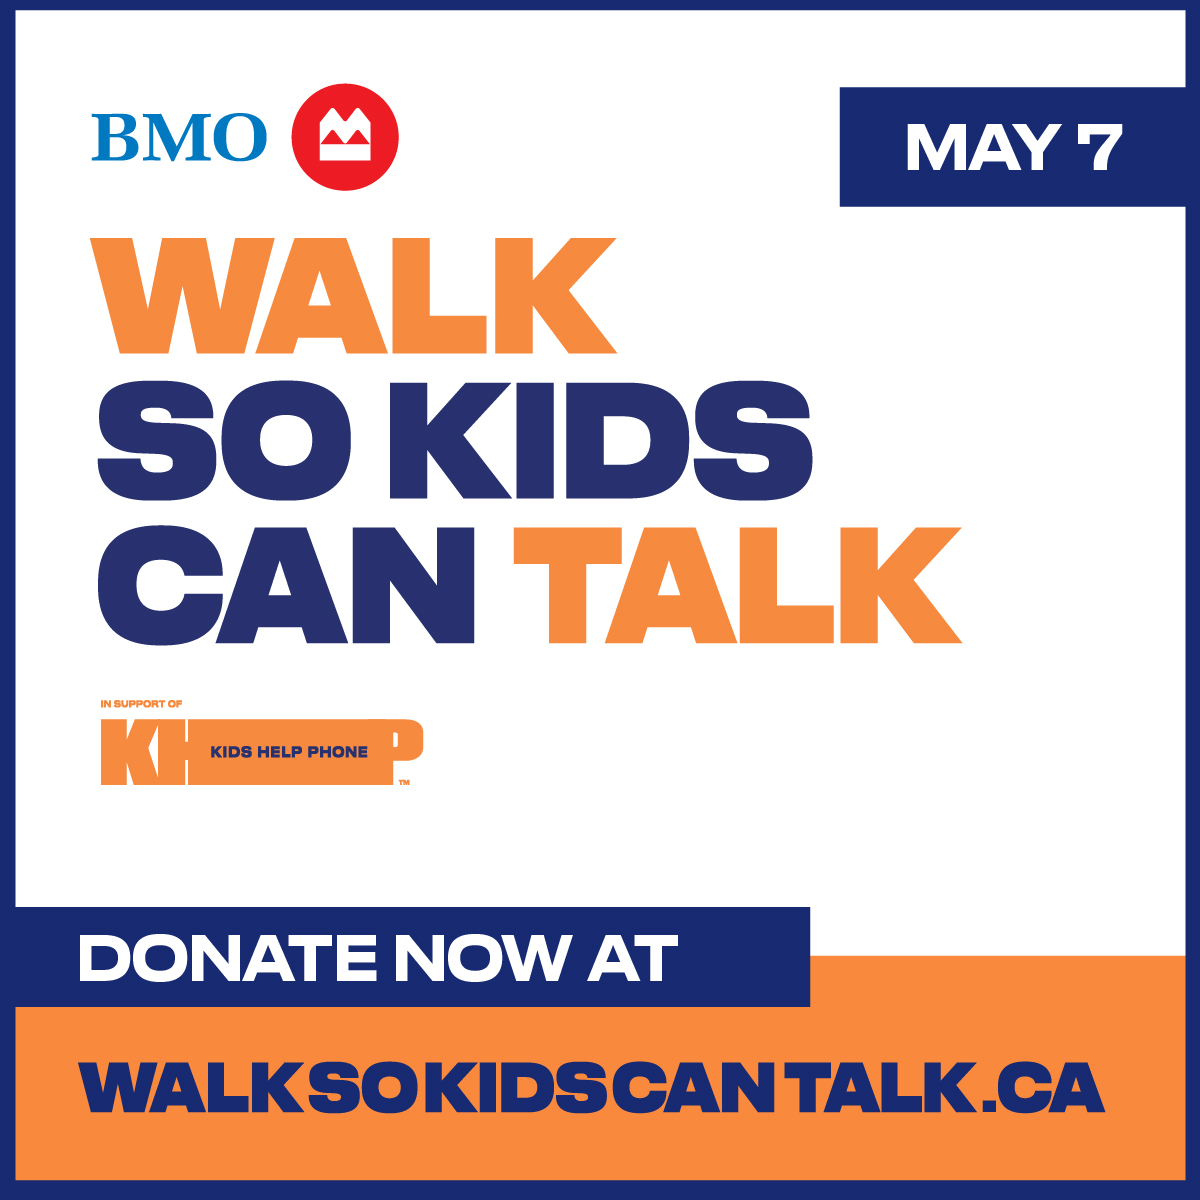 Together, we can #FeelOutLoud and show young people that their feelings always have a place to go.
 
walksokidscantalk.ca
 
@KidsHelpPhone #BMOWalkSoKidsCanTalk #SteeleAutoGroup #WhySteeleAuto #YourWayAuto